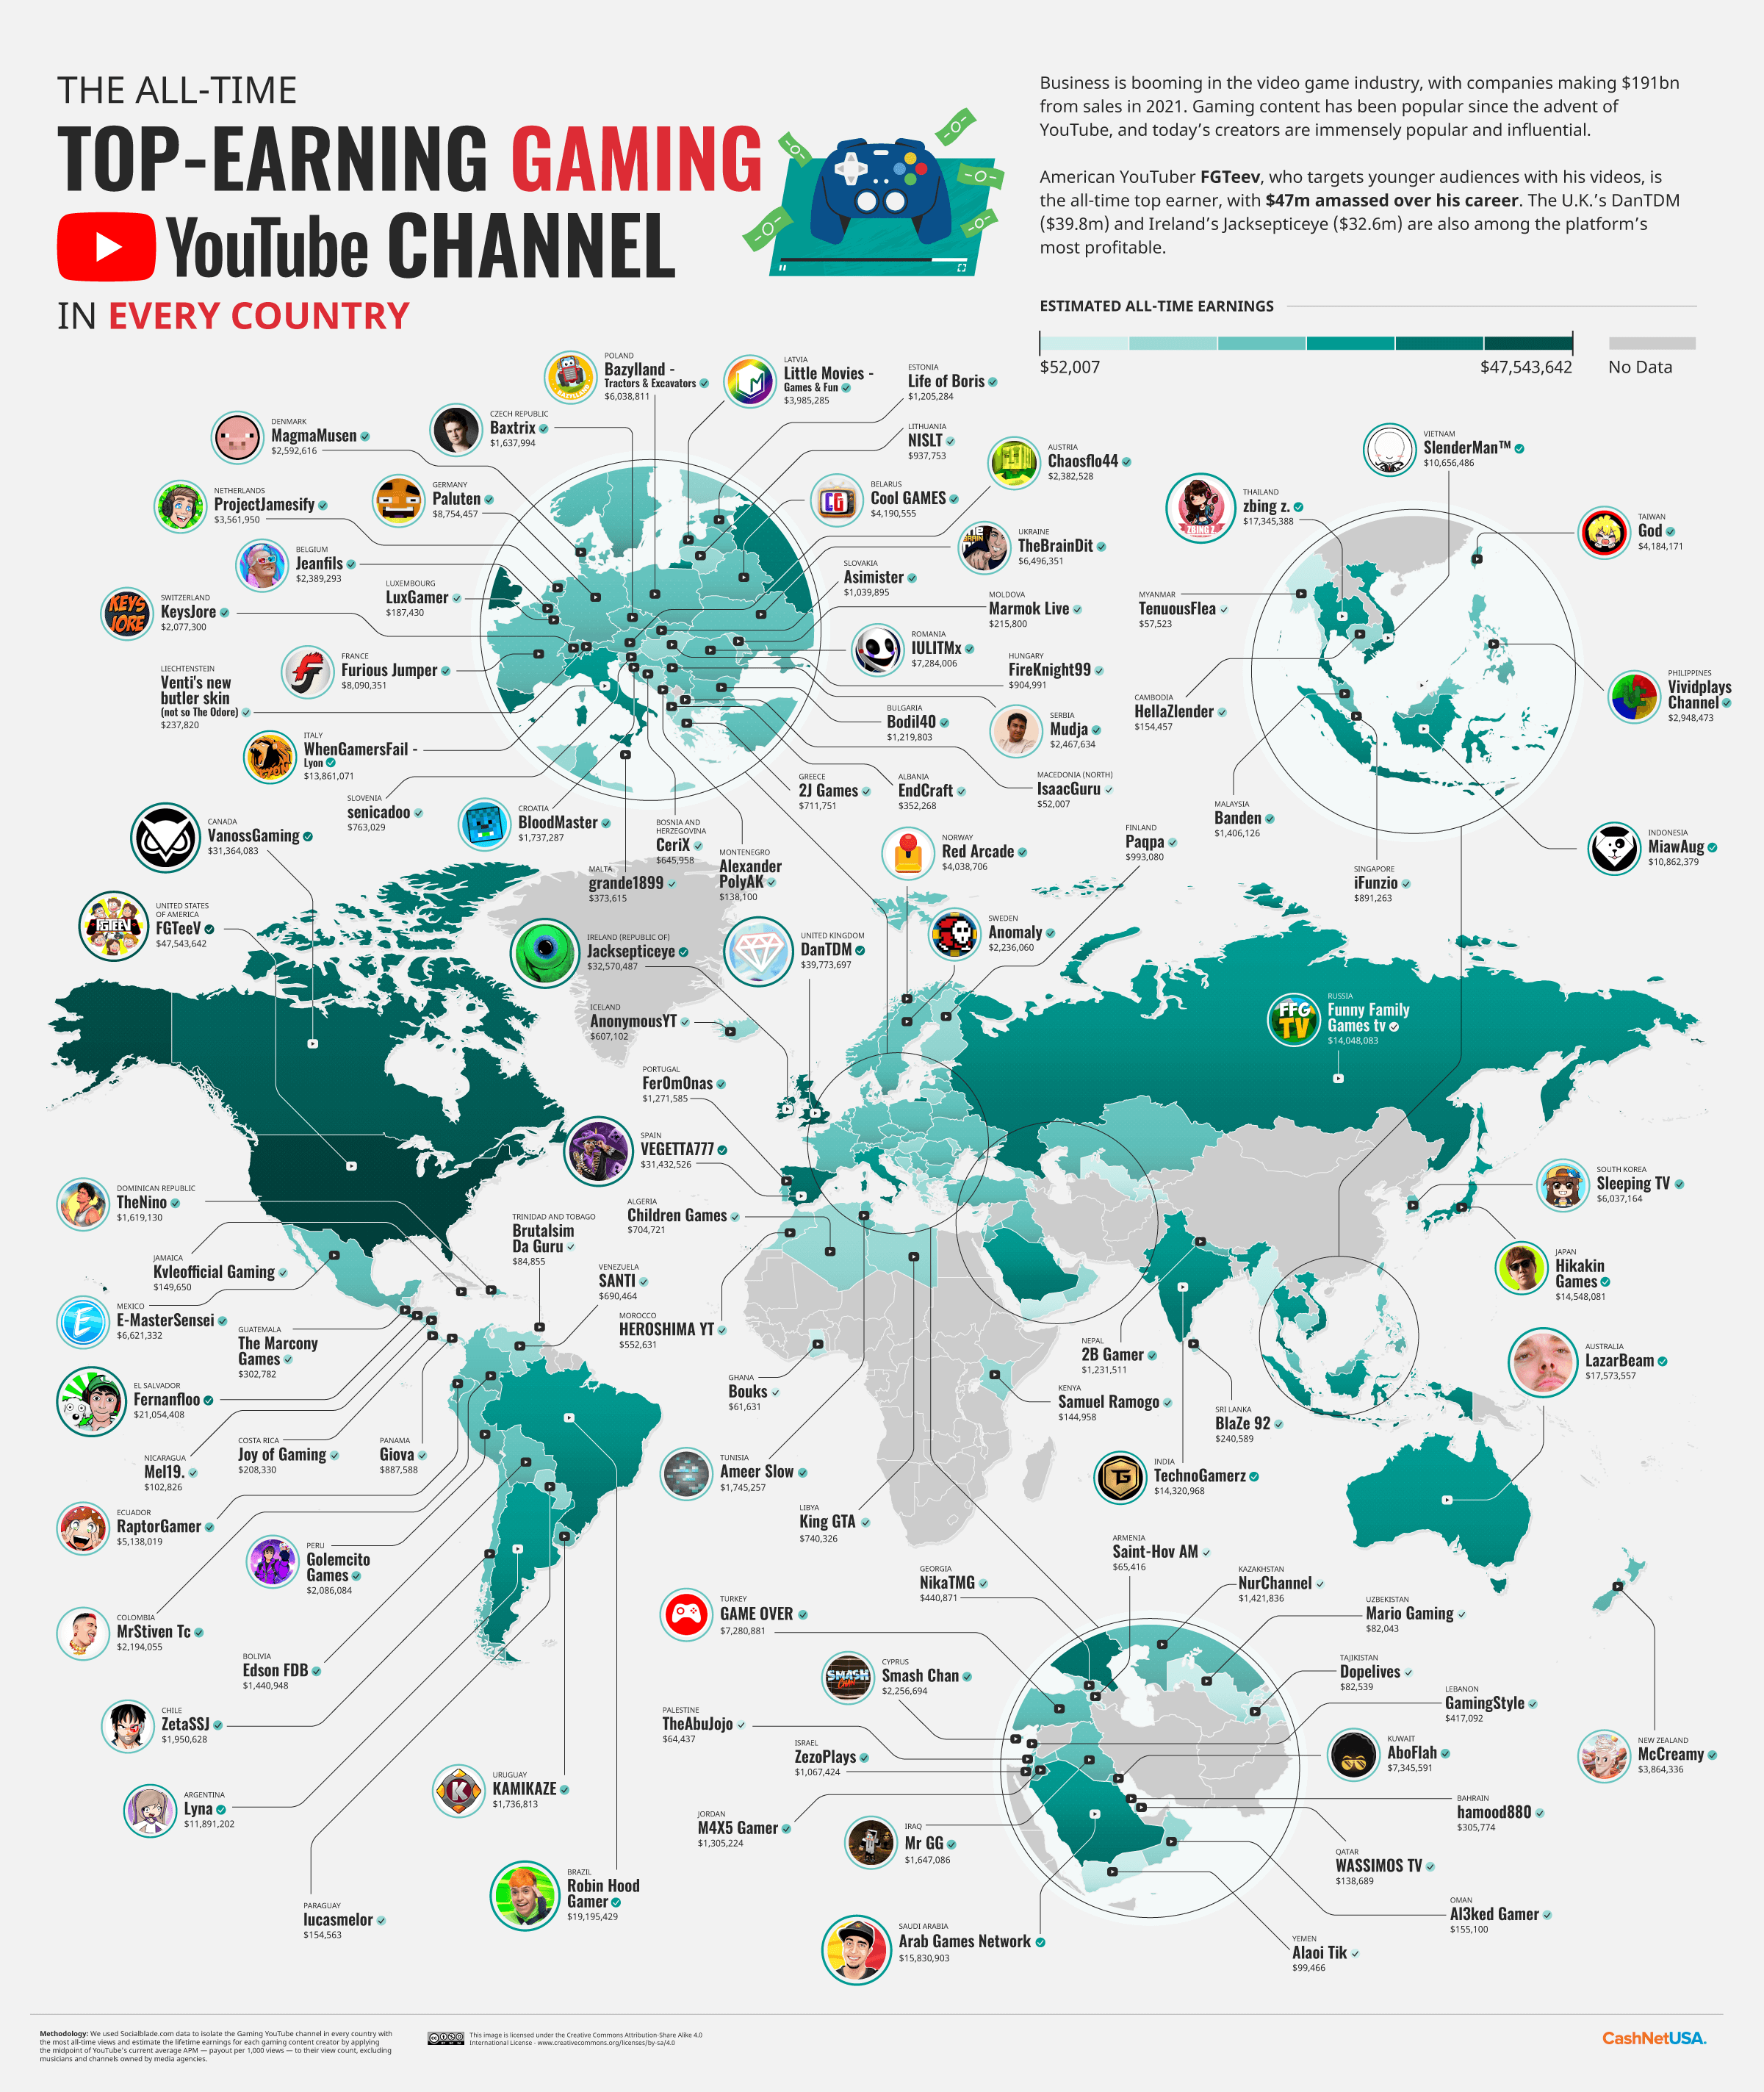 The Top Earning Gaming YouTuber in Every Country World Map